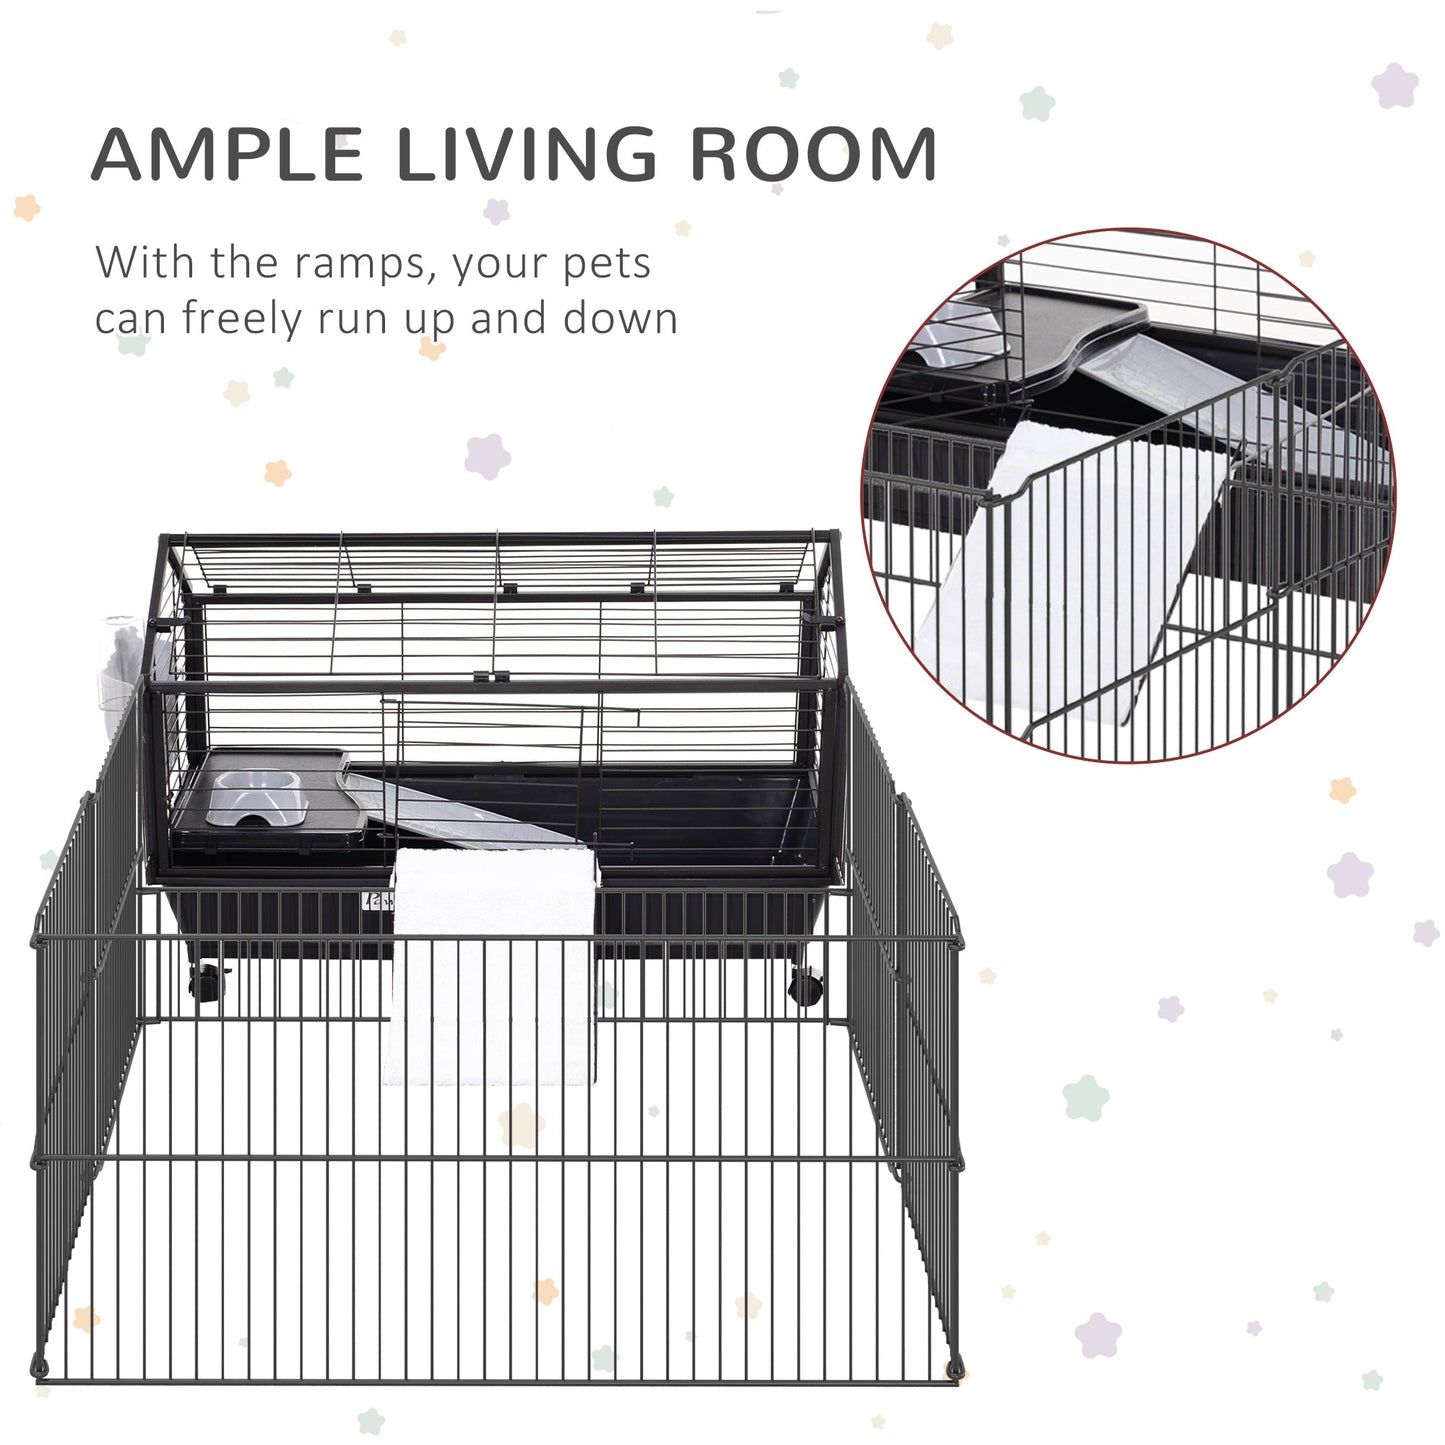 -PawHut 35"L Small Animal Hutch Cage, Bunny Playpen with Main House with Rolling Wheel, Guinea Pig & Chinchilla Cage, Black - Outdoor Style Company